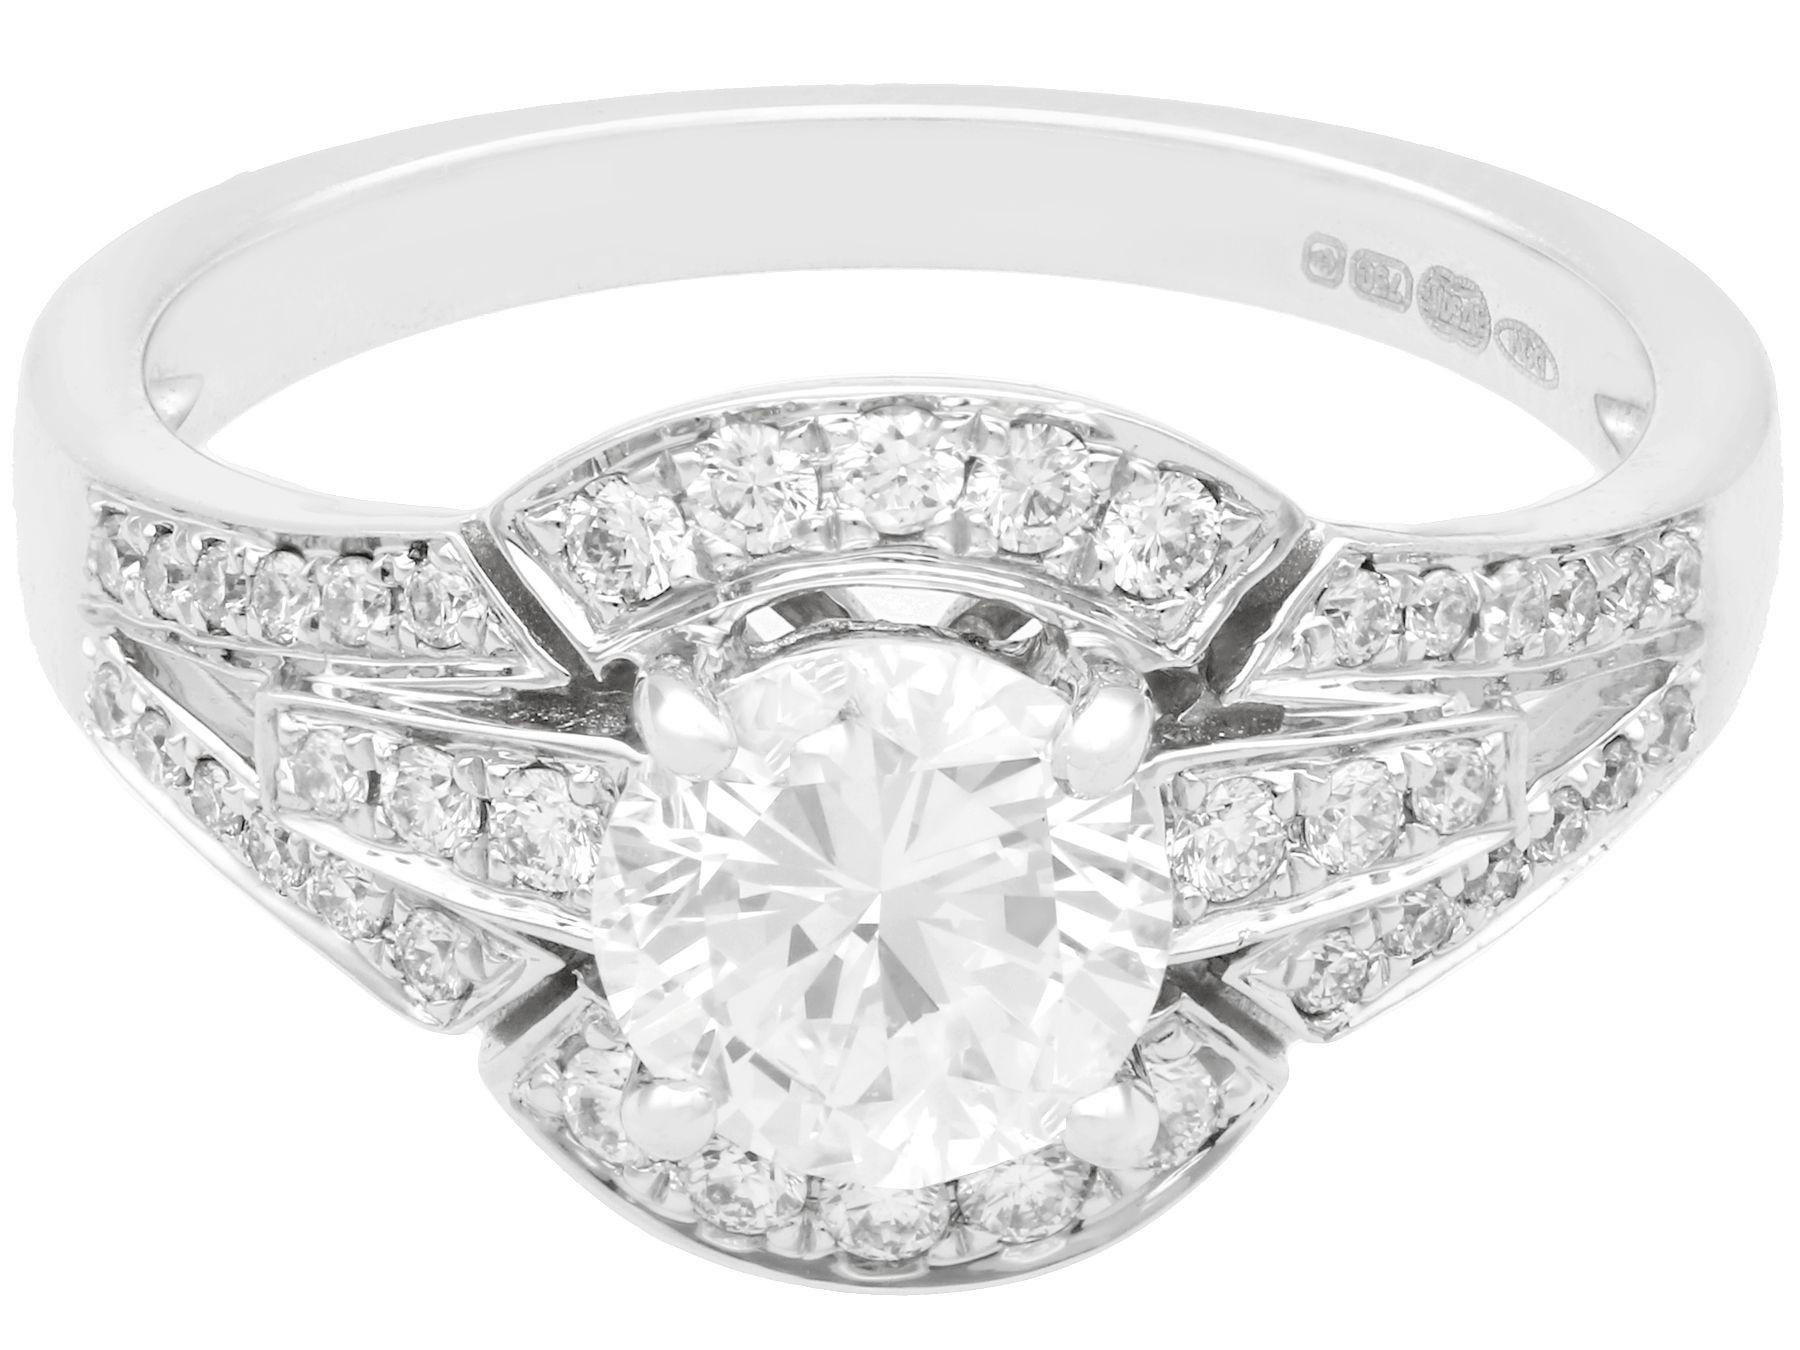 Contemporary 1.26 Carat Diamond and White Gold Engagement Ring For Sale